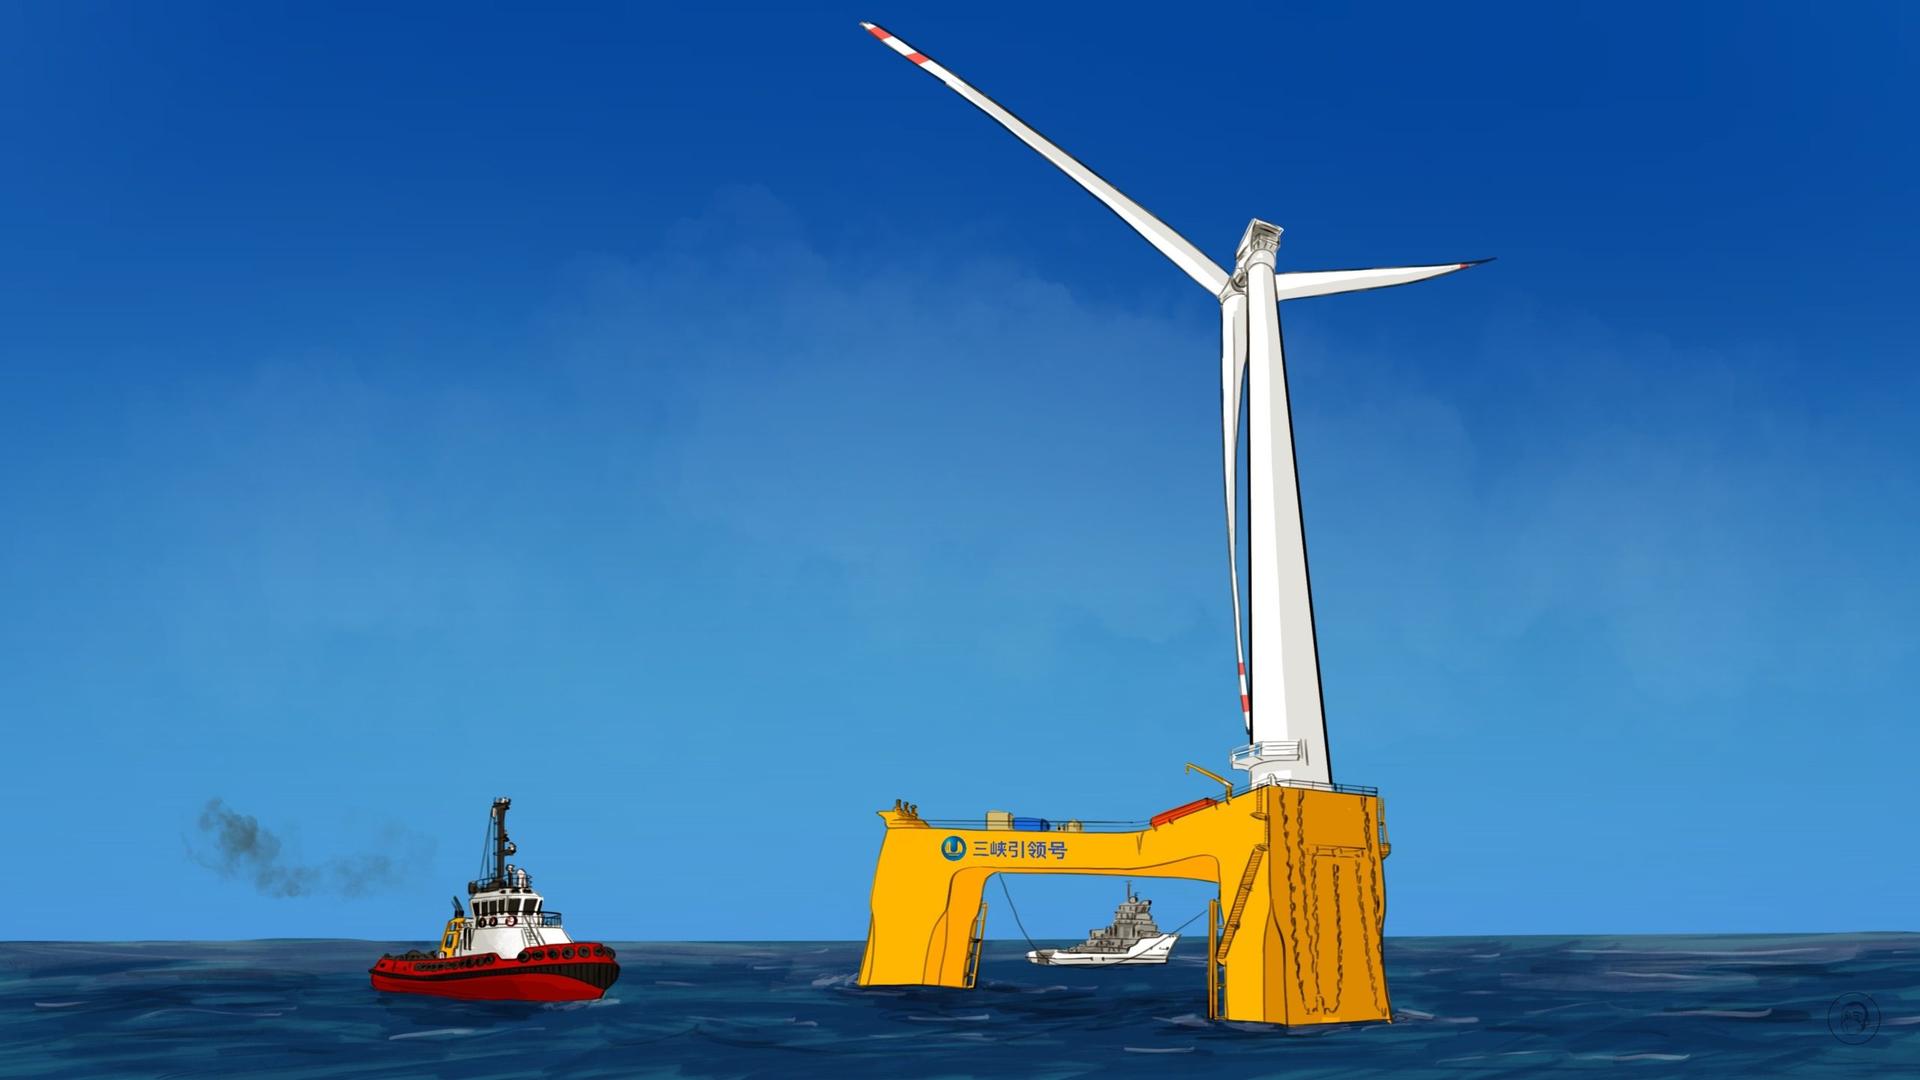 An illustration by Alex Santafe depicting a chinese wind power floating plant